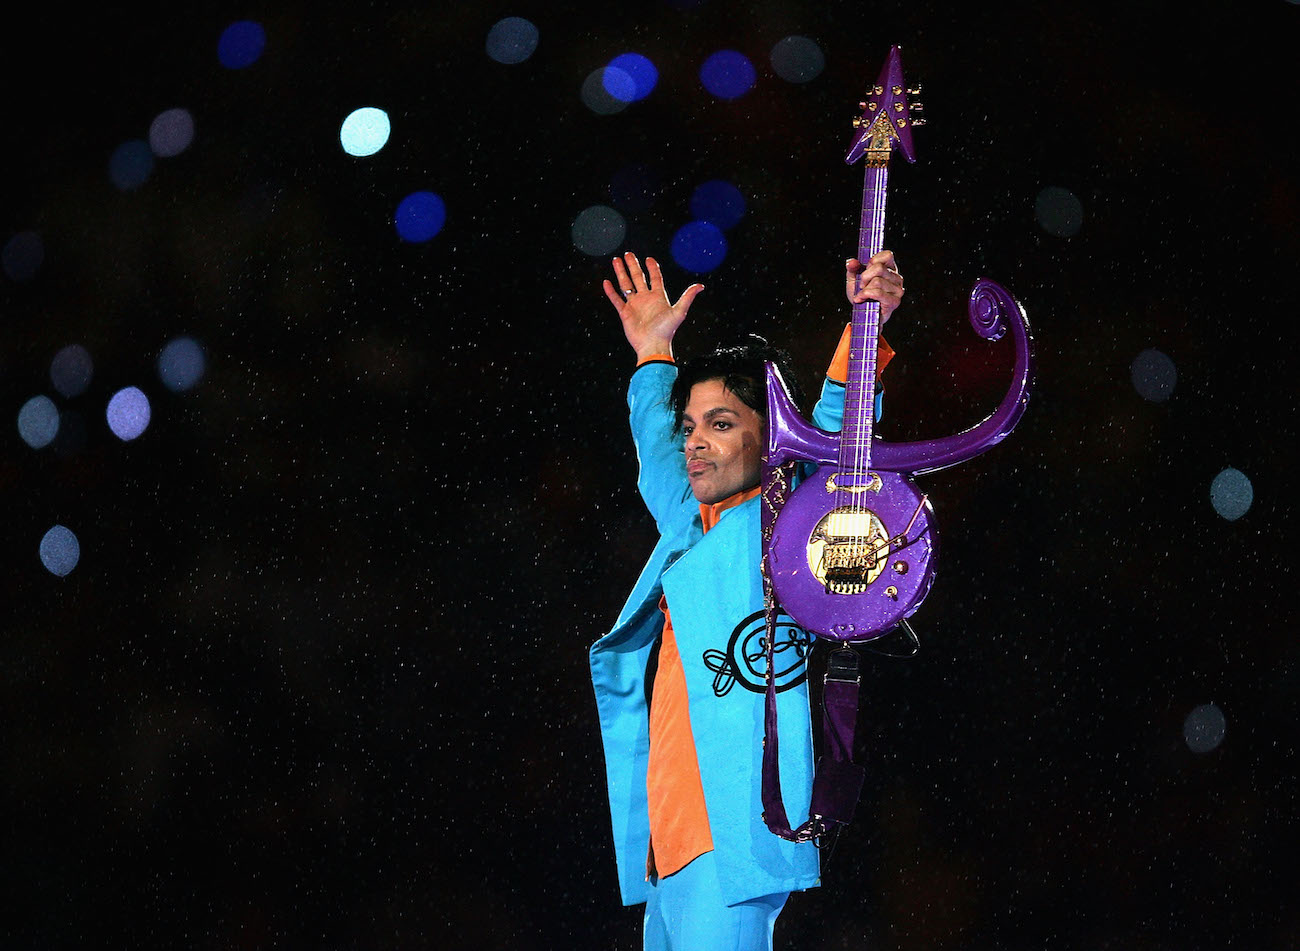 Prince plays guitar at the 2007 Super Bowl wearing a blue outfit